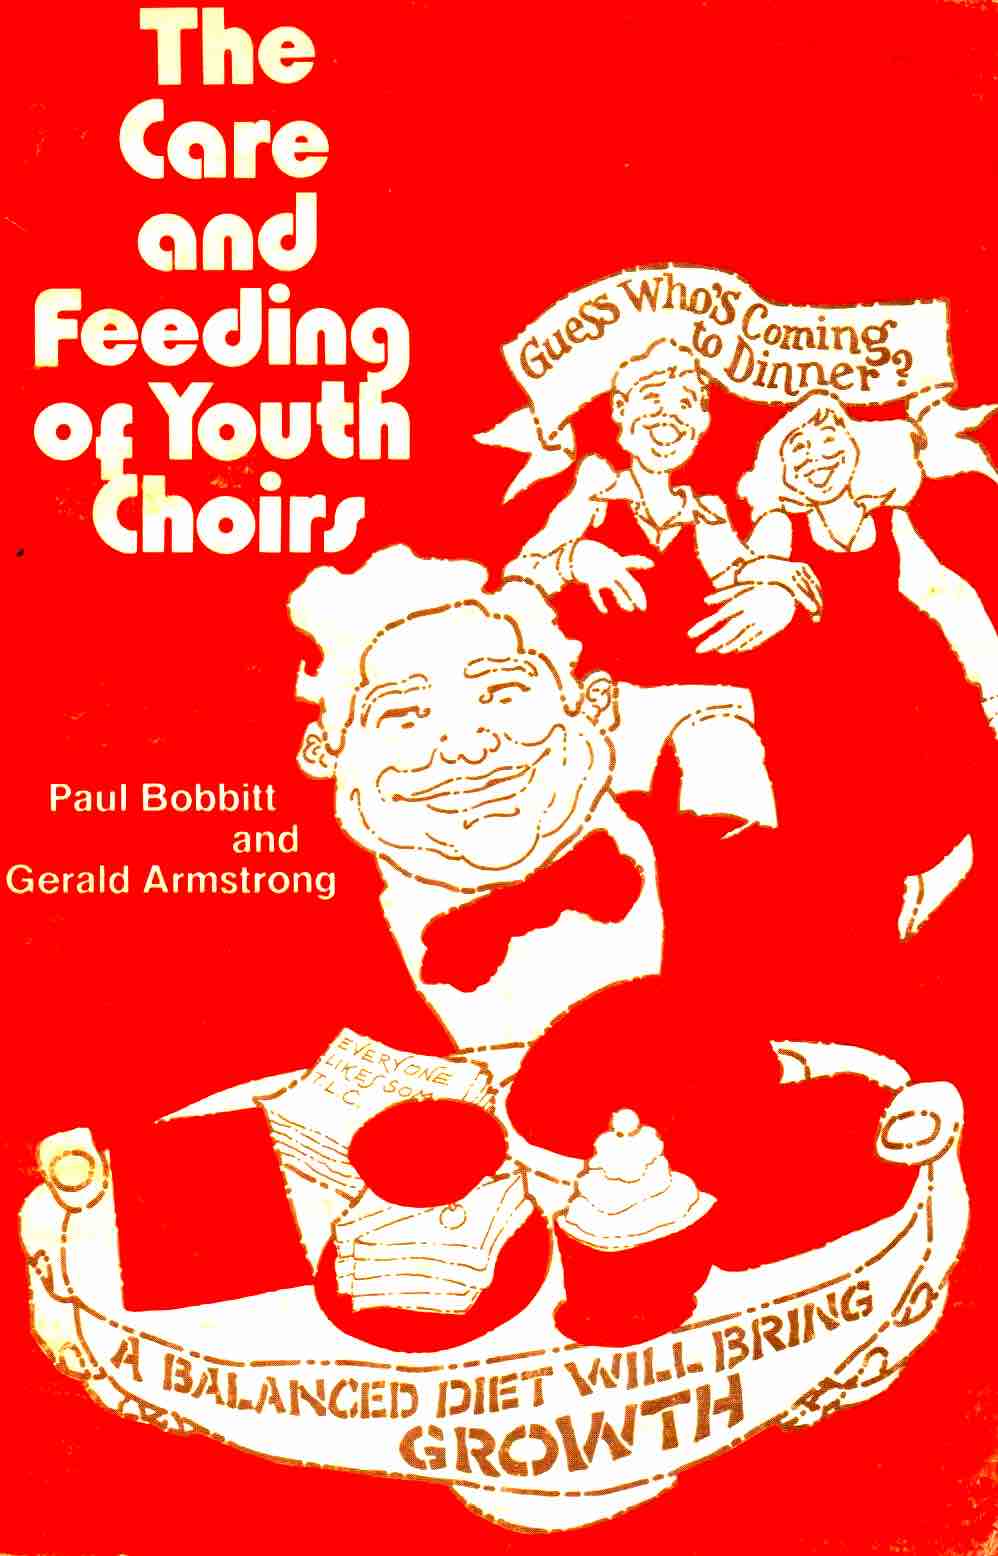 Cover of The Care and Feeding of Youth Choirs